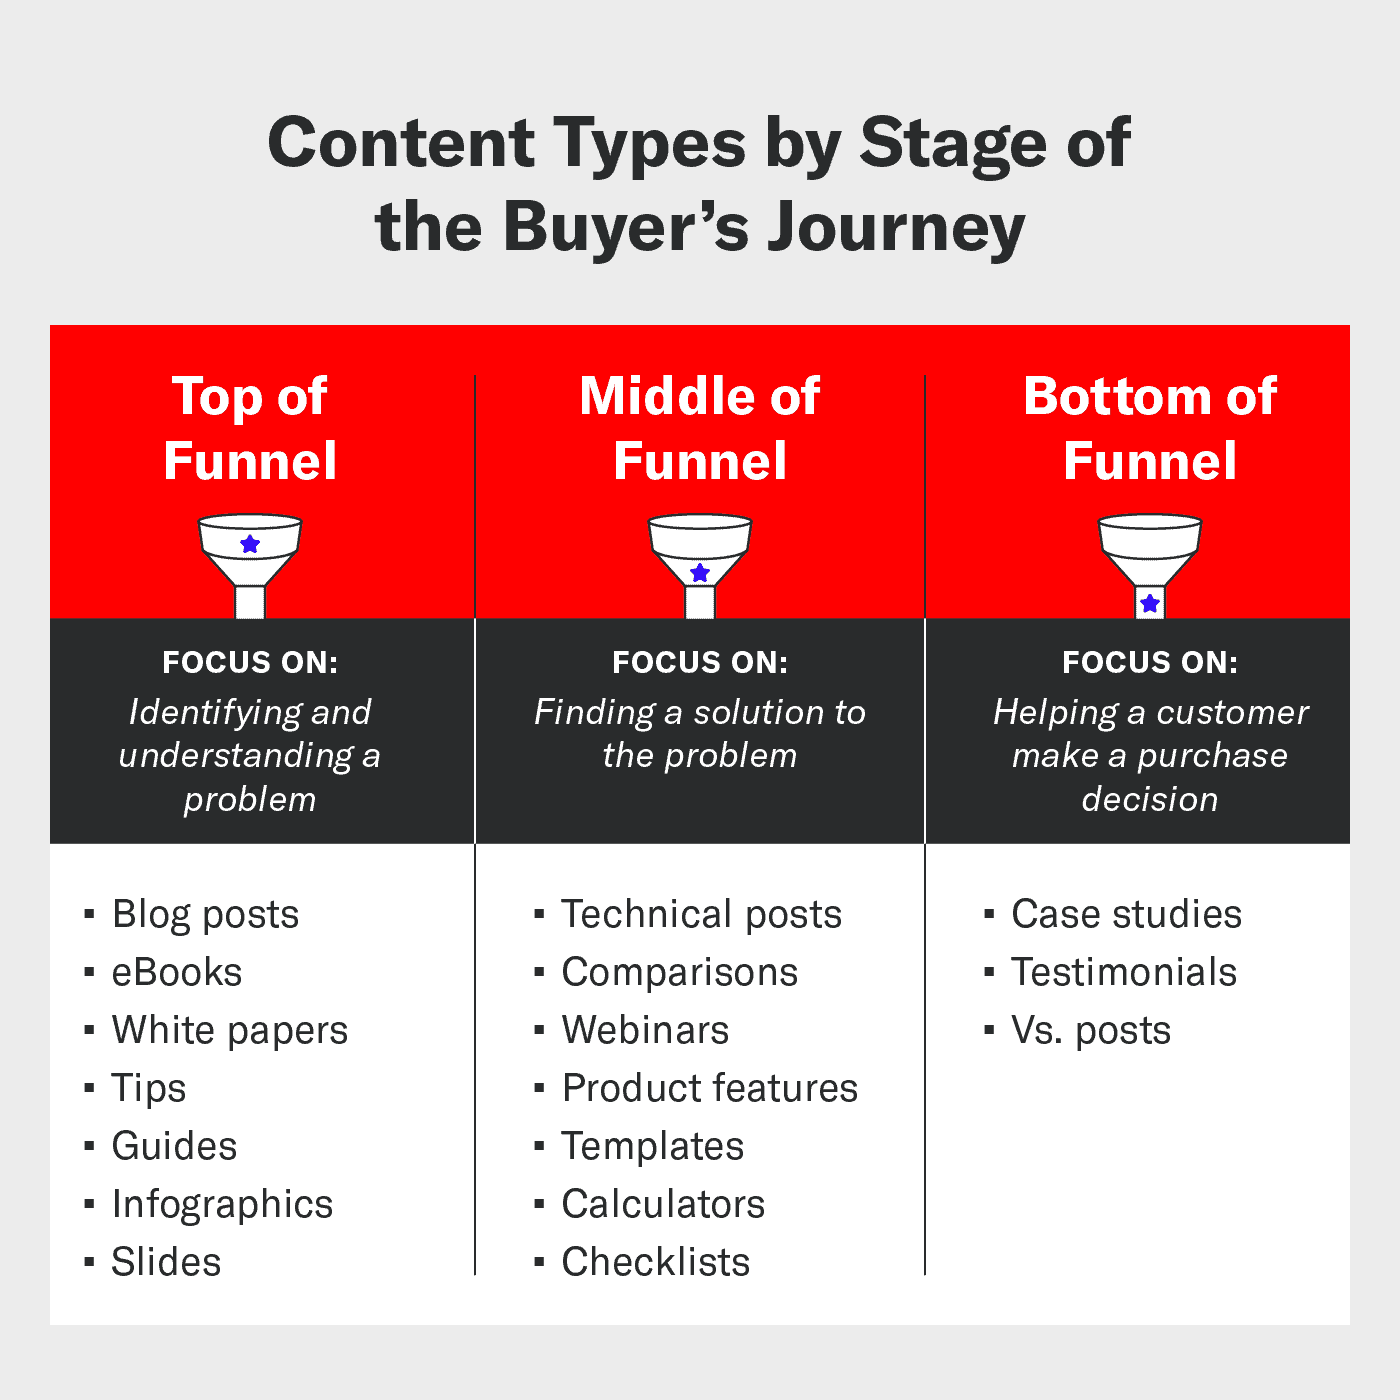 Content types by stage of the buyer's journey